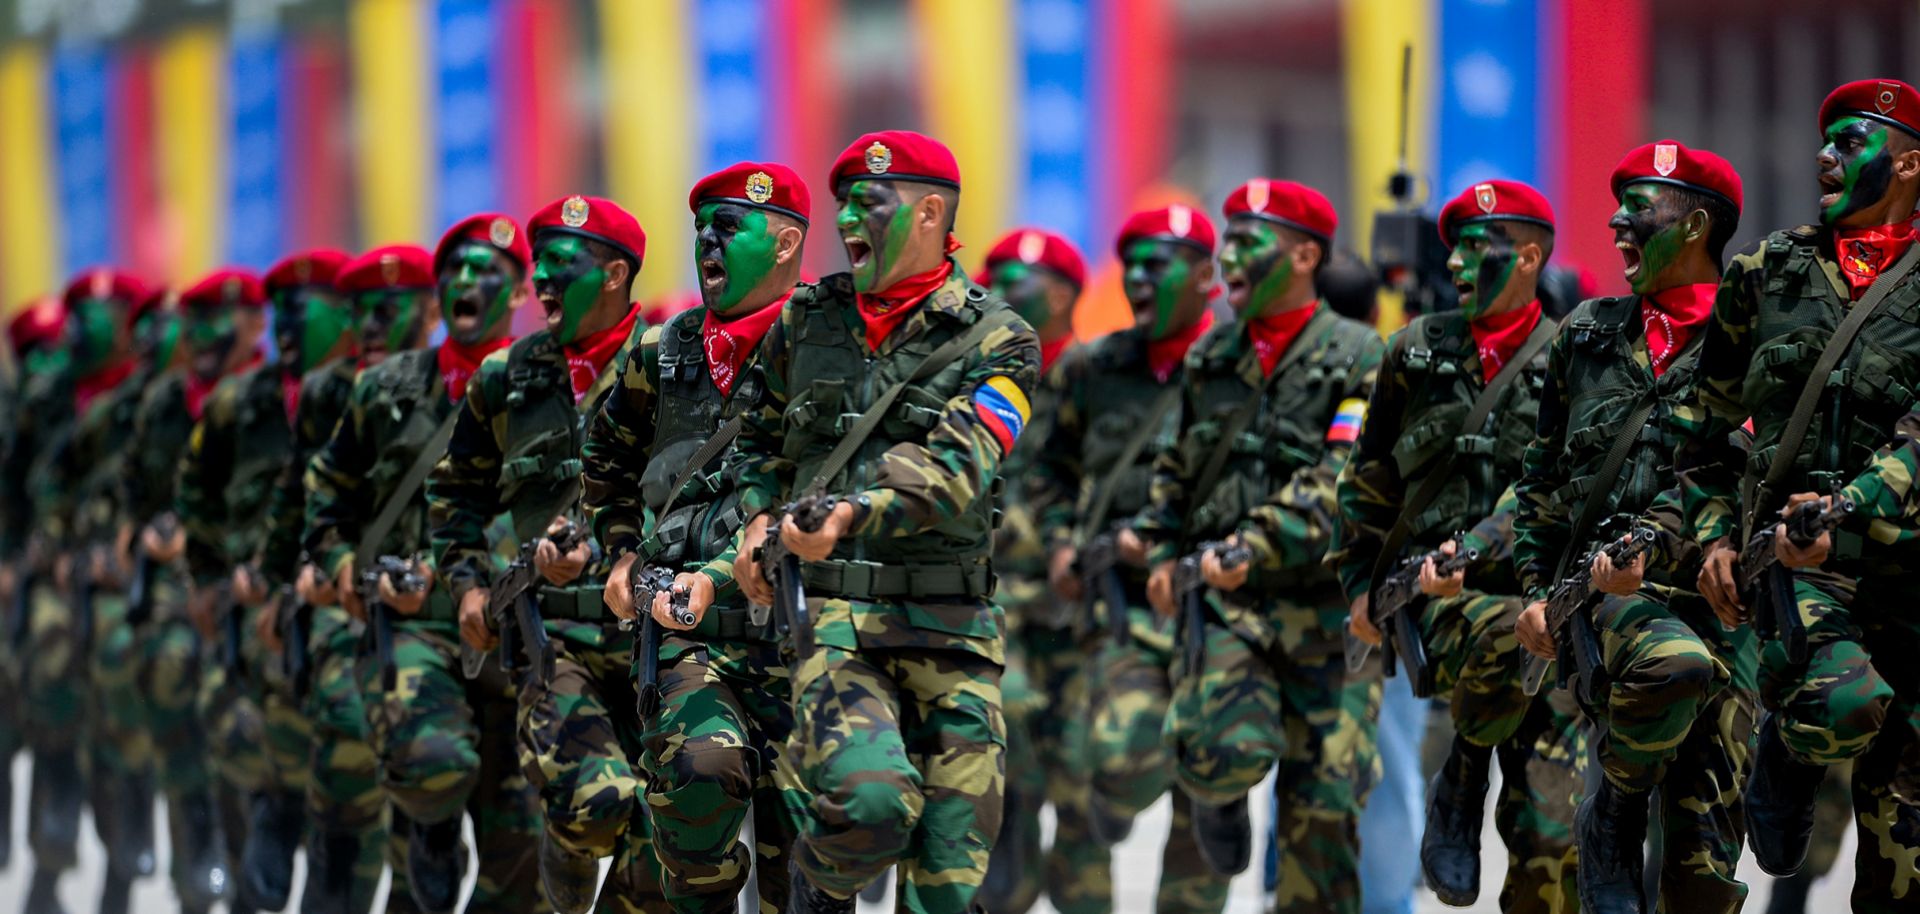 The Venezuelan government's biggest concern is not what the opposition might do next, but what its own armed forces are capable of.